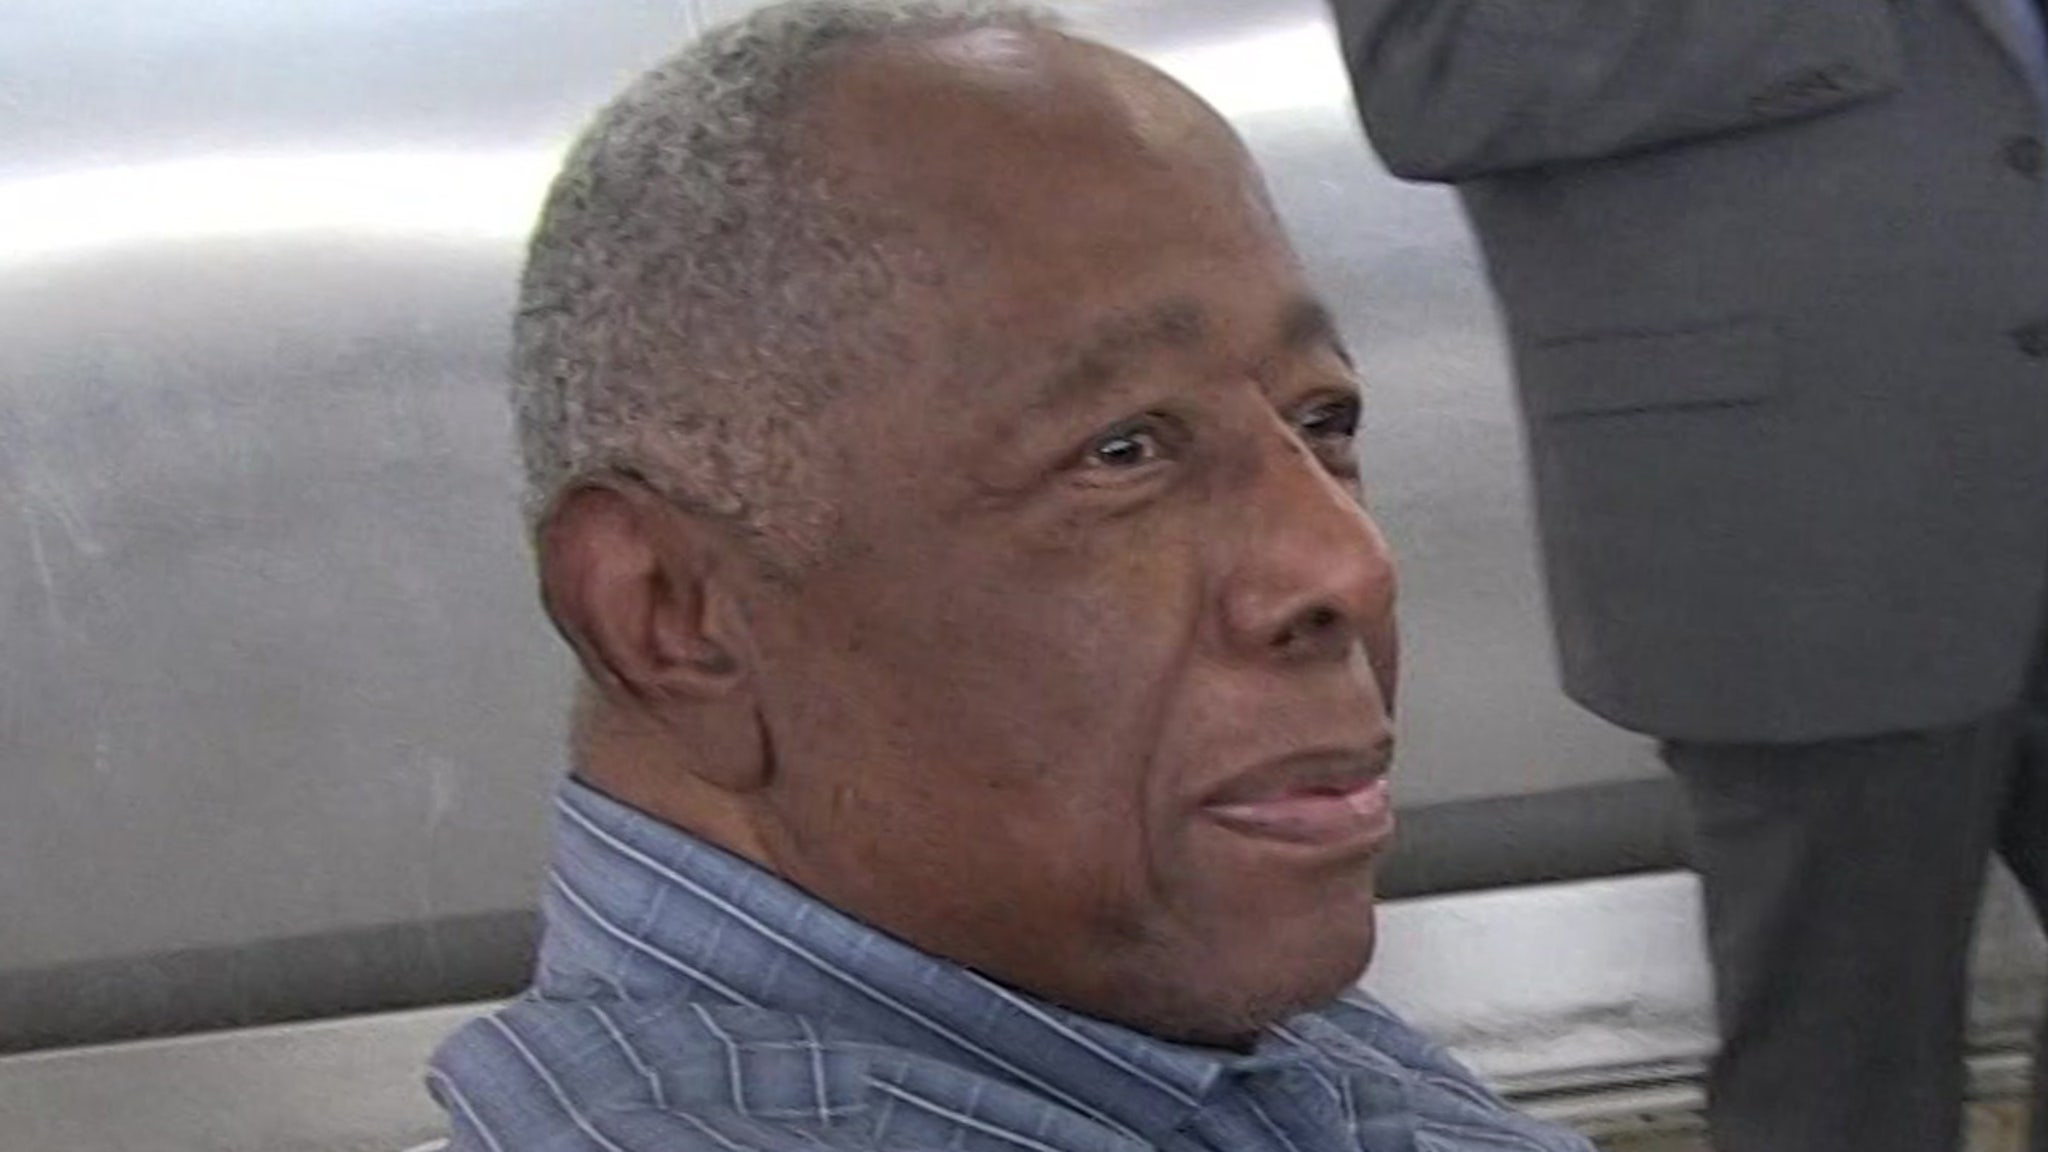 Hank Aaron dies of natural causes, COVID-19 vaccine is not a factor, officials believe